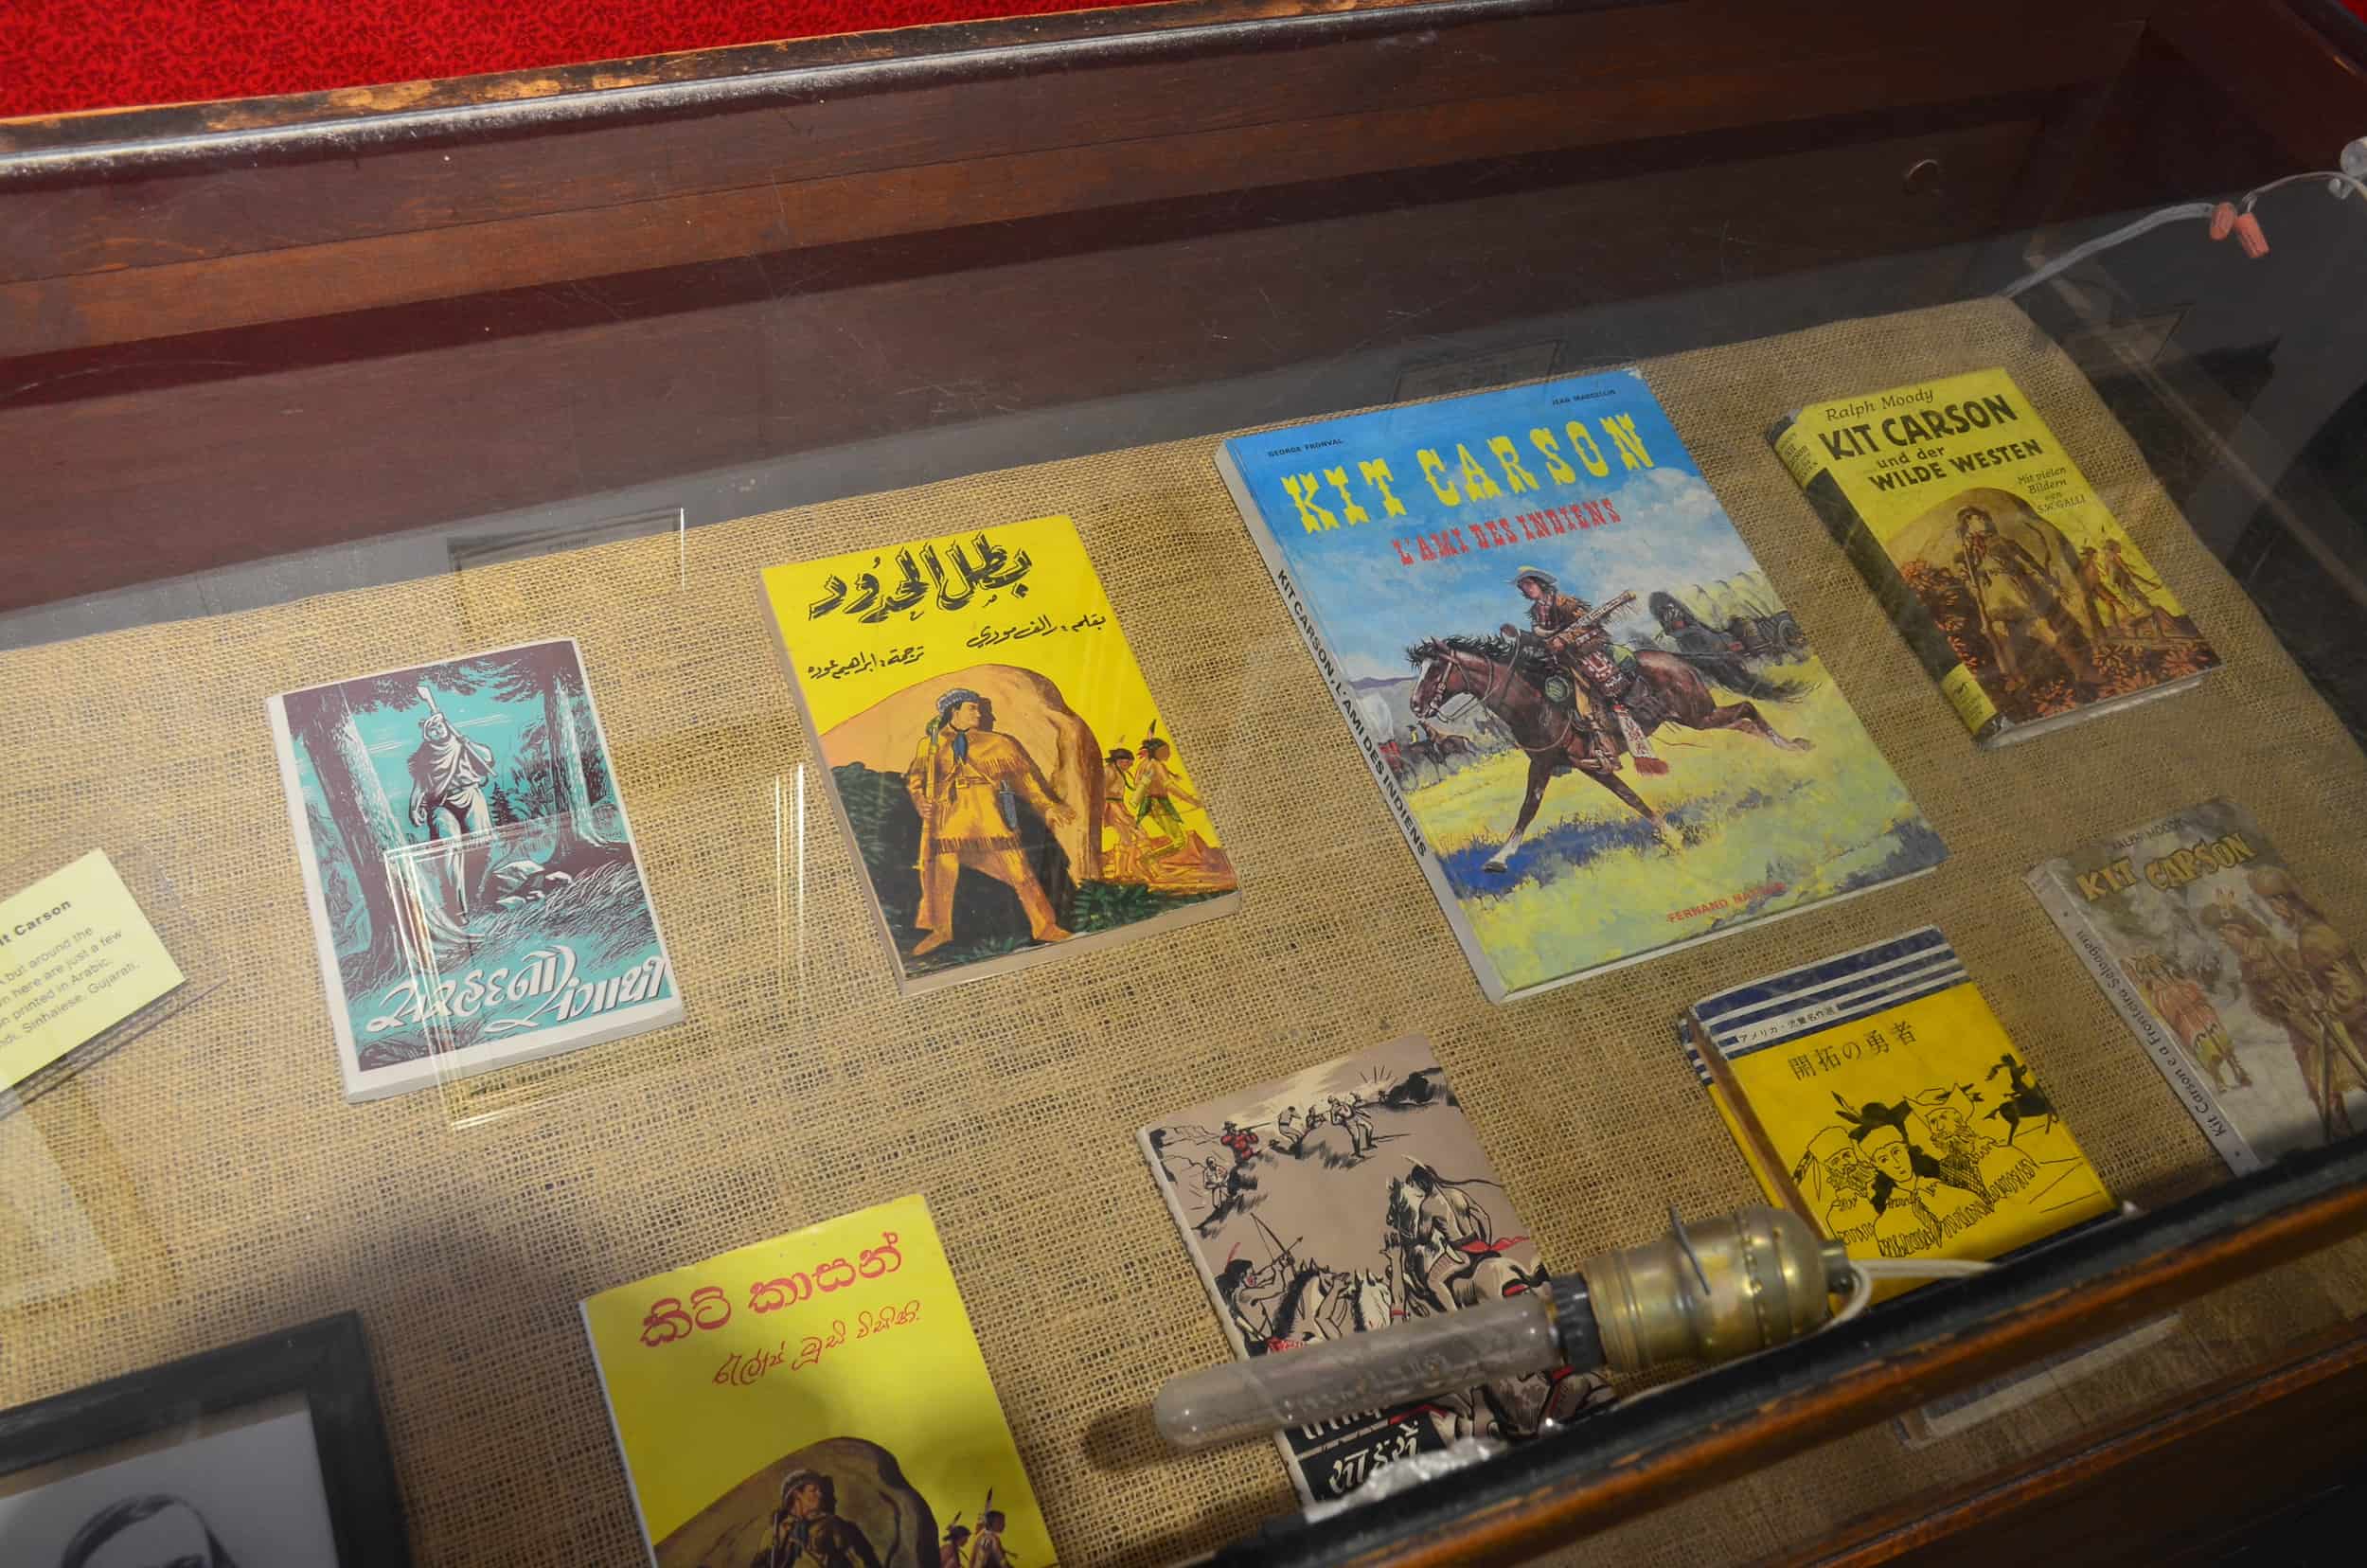 Books about Kit Carson at the Kit Carson Home and Museum in Taos, New Mexico